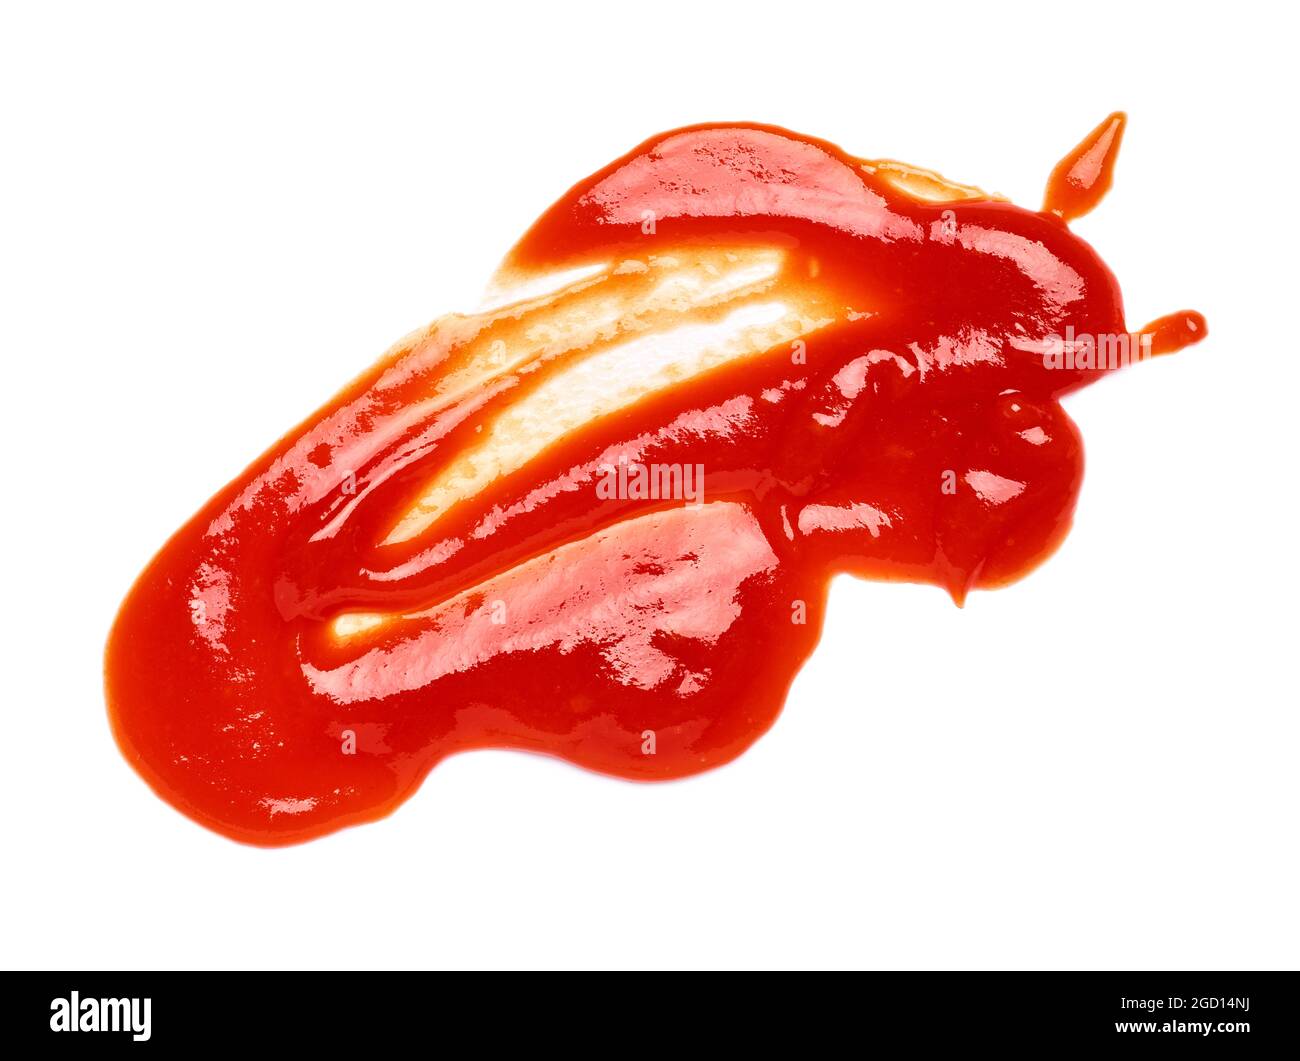 ketchup stain fleck food drop tomato sauce accident liquid splash dirty fleck red Stock Photo